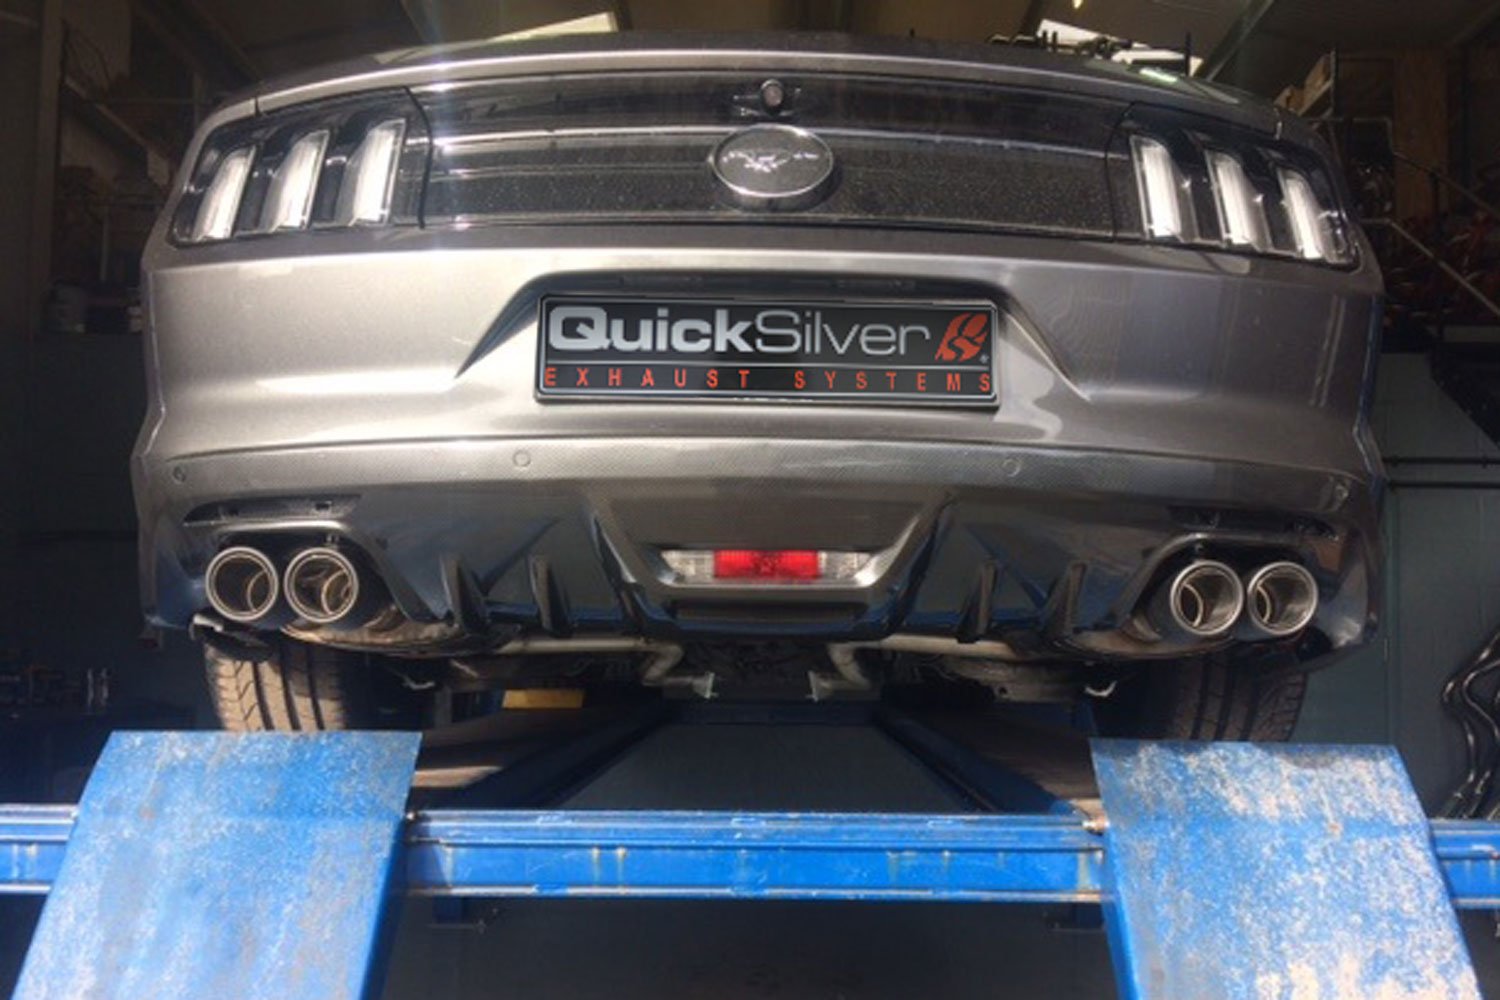 Ford Mustang 2.3 Ecoboost - Sound Architect Active Valve Sport Exhaust with Y-Pipe and Quad carbon Tips (2015-18)